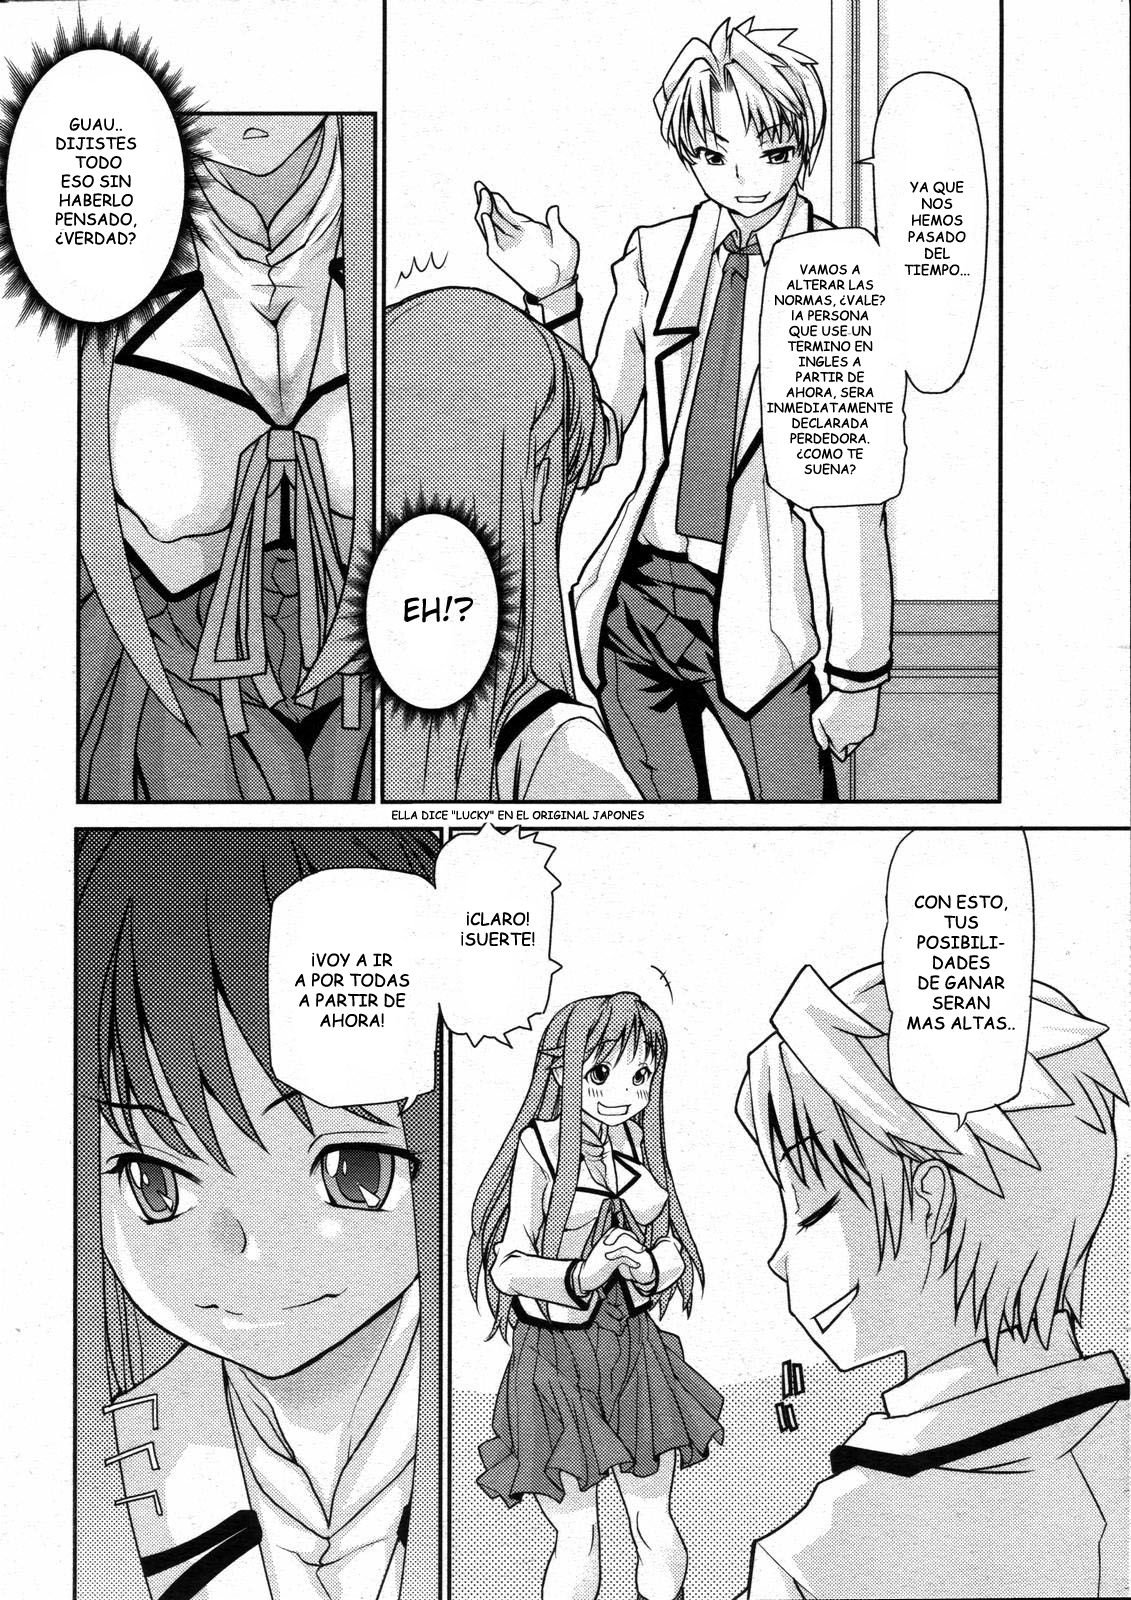 Wise Ass - Chapter 2 - 9